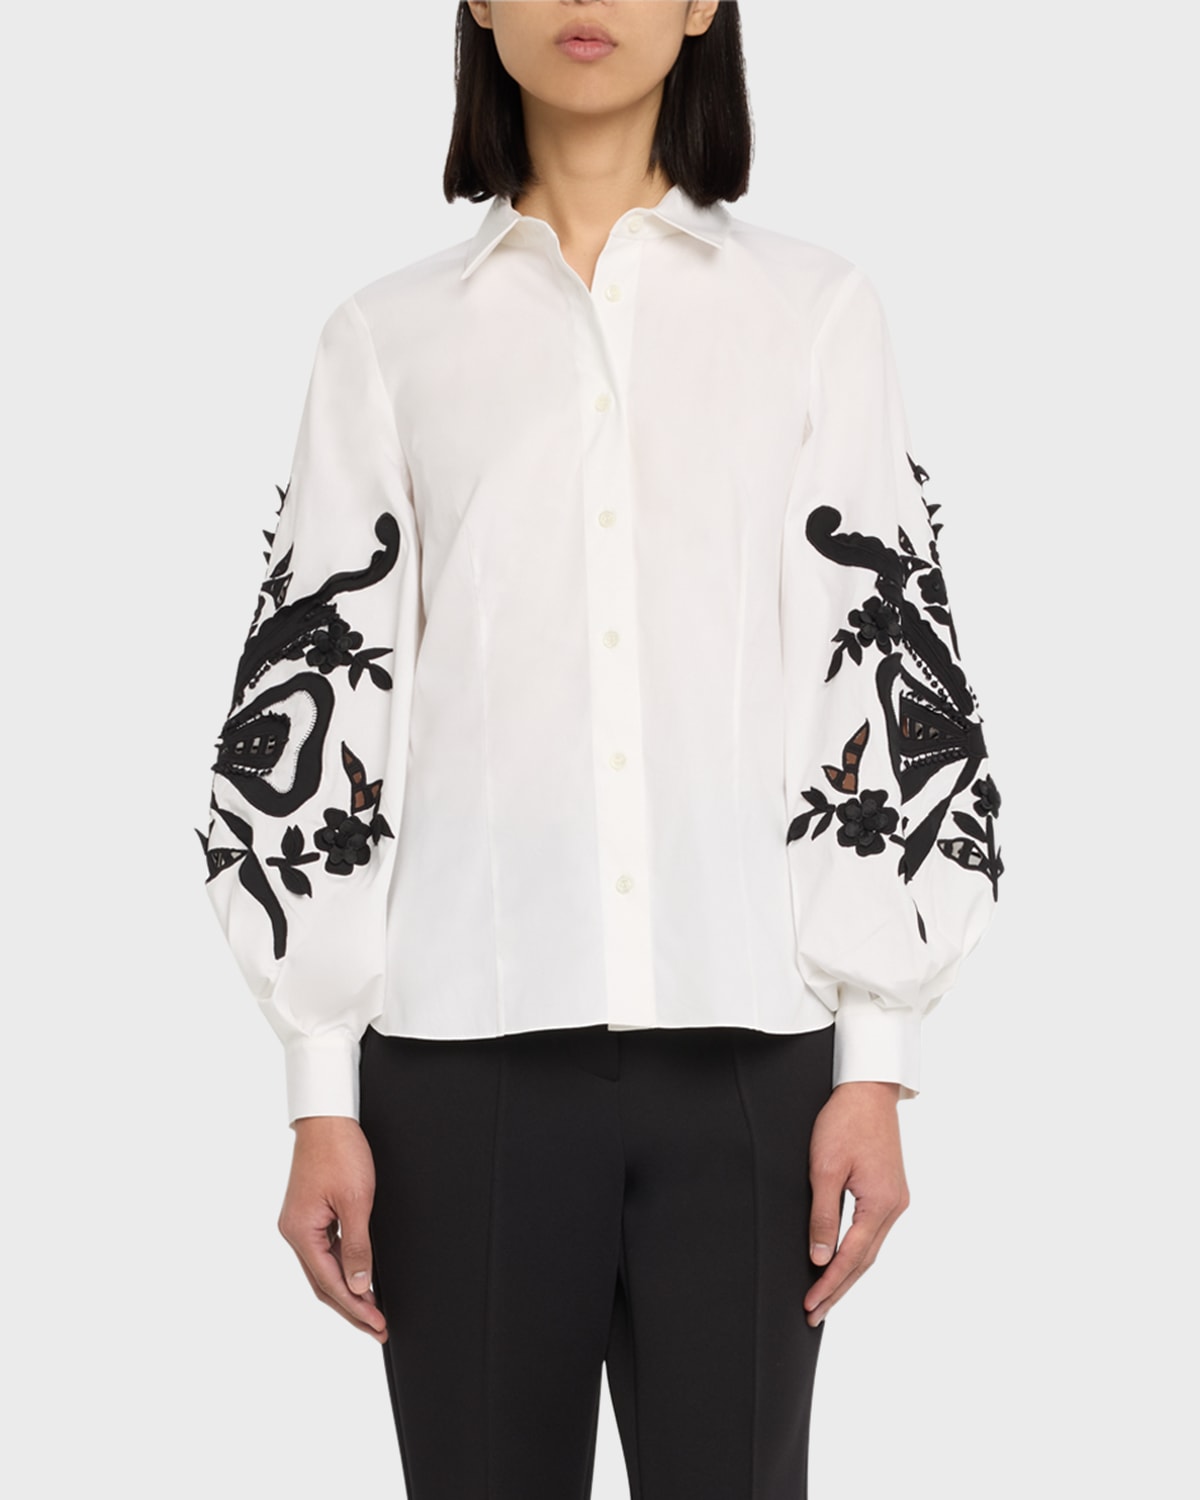 CAROLINA HERRERA EMBROIDERED PUFF-SLEEVE BUTTON-FRONT BLOUSE